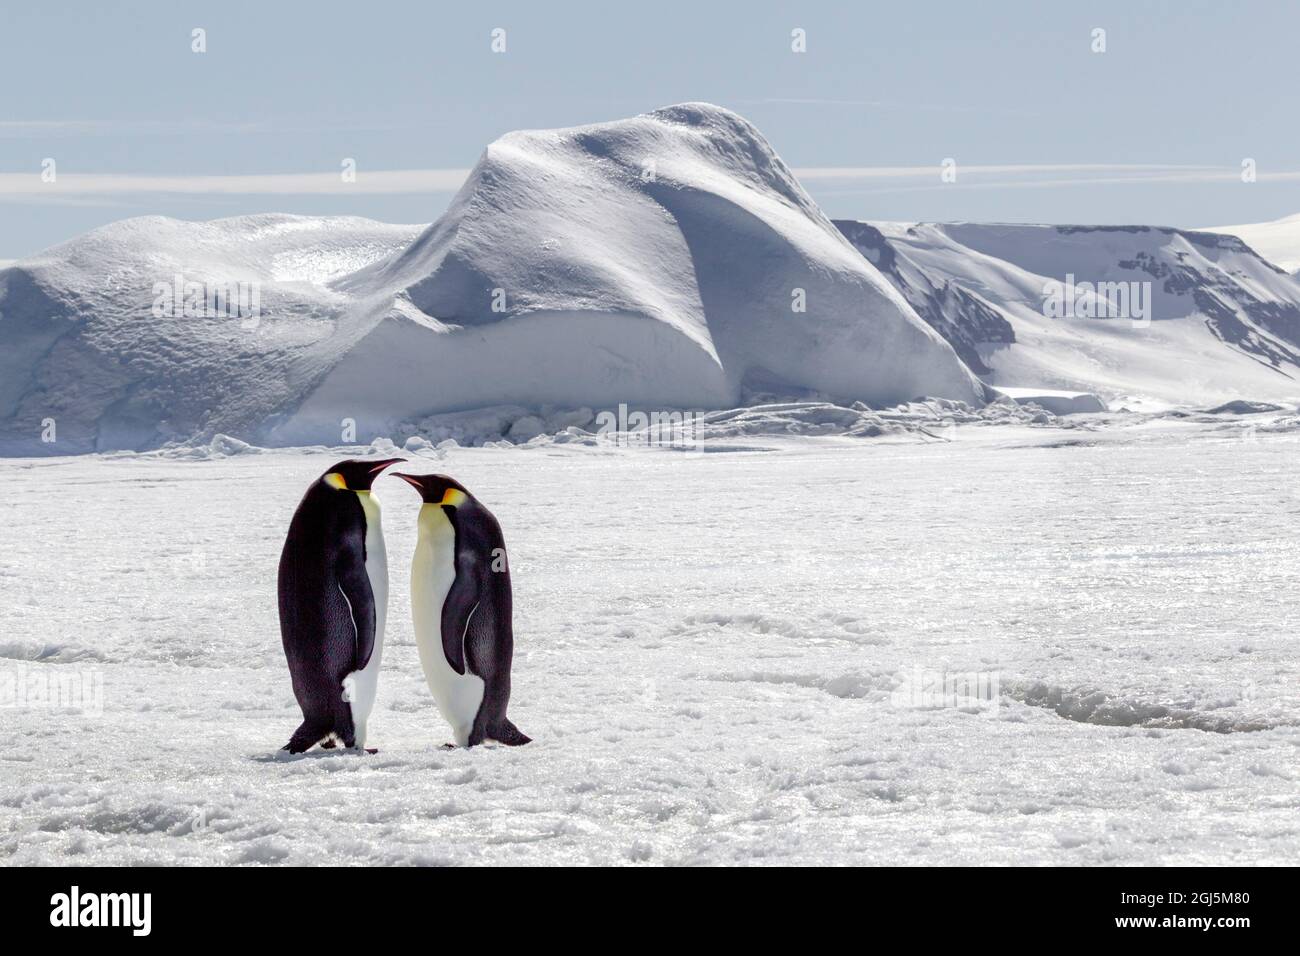 Antarctica, Snow Hill. Two emperor penguins stand together in the icy landscape. Stock Photo